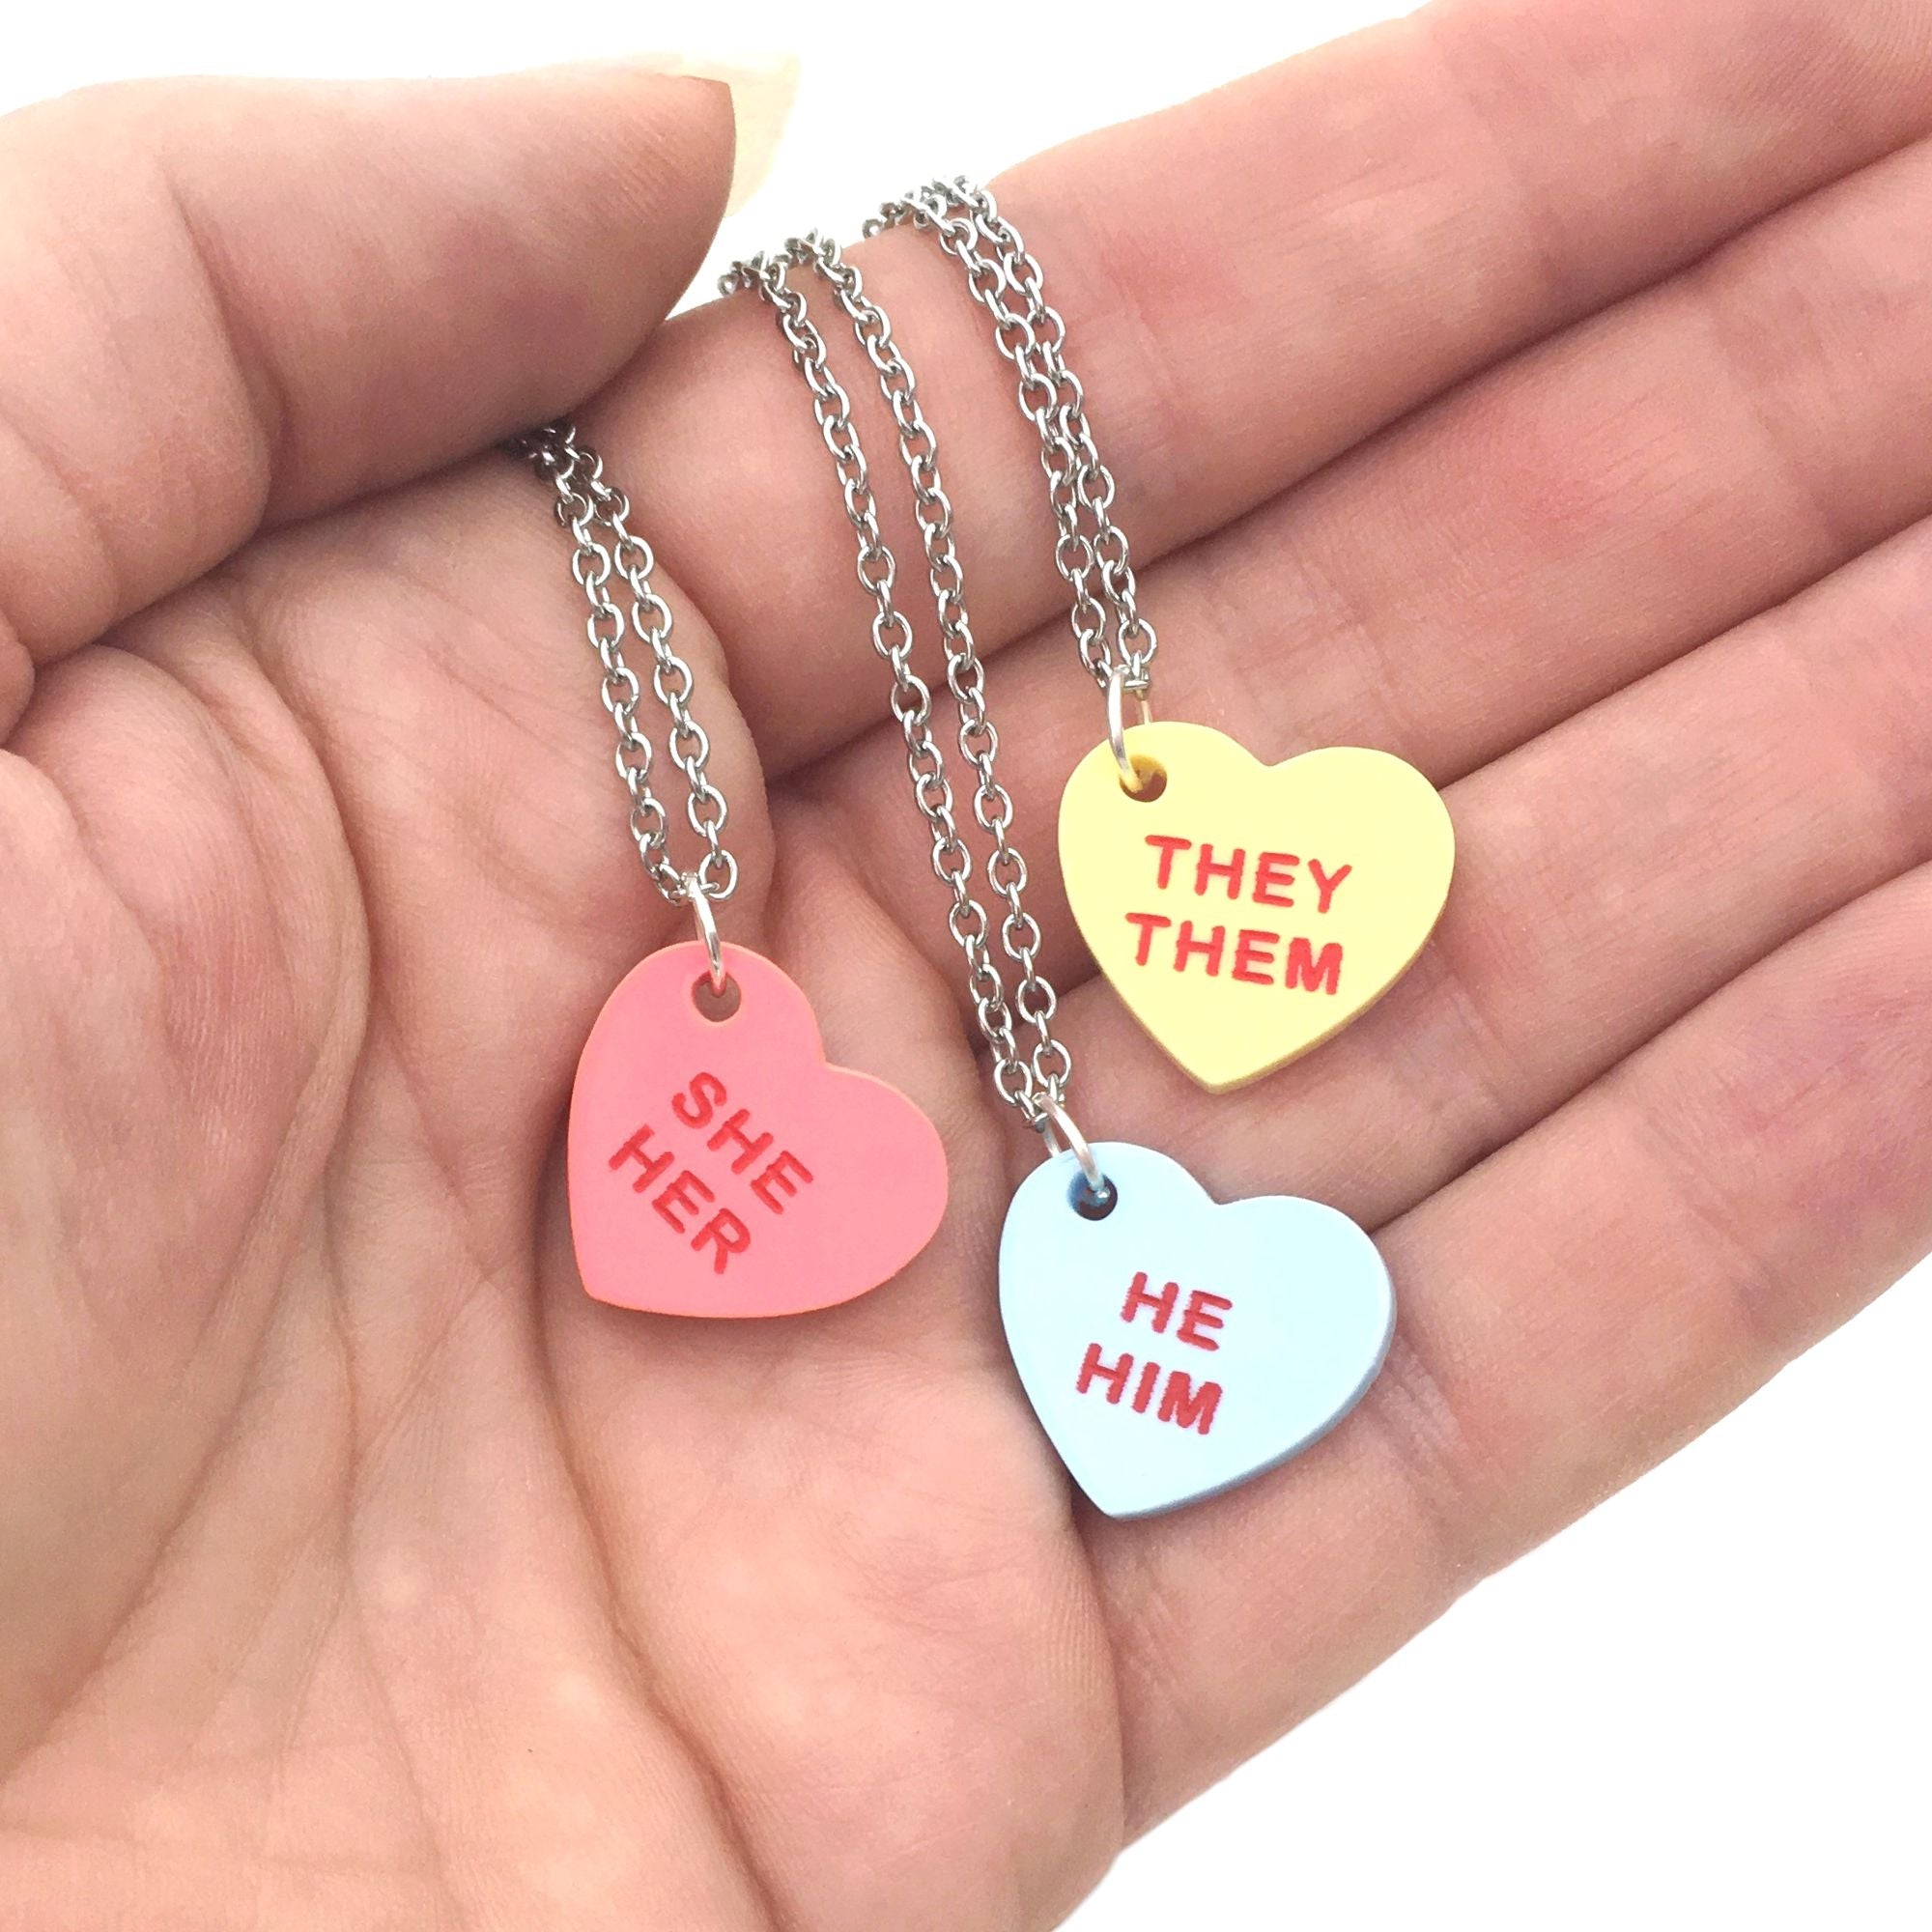 Pronoun Necklace, LGBTQ Pride, They / Them / She / Her / He / Him Gold,  Silver Jewelry, Personalized Gift for They / Them Ships Next Day - Etsy UK